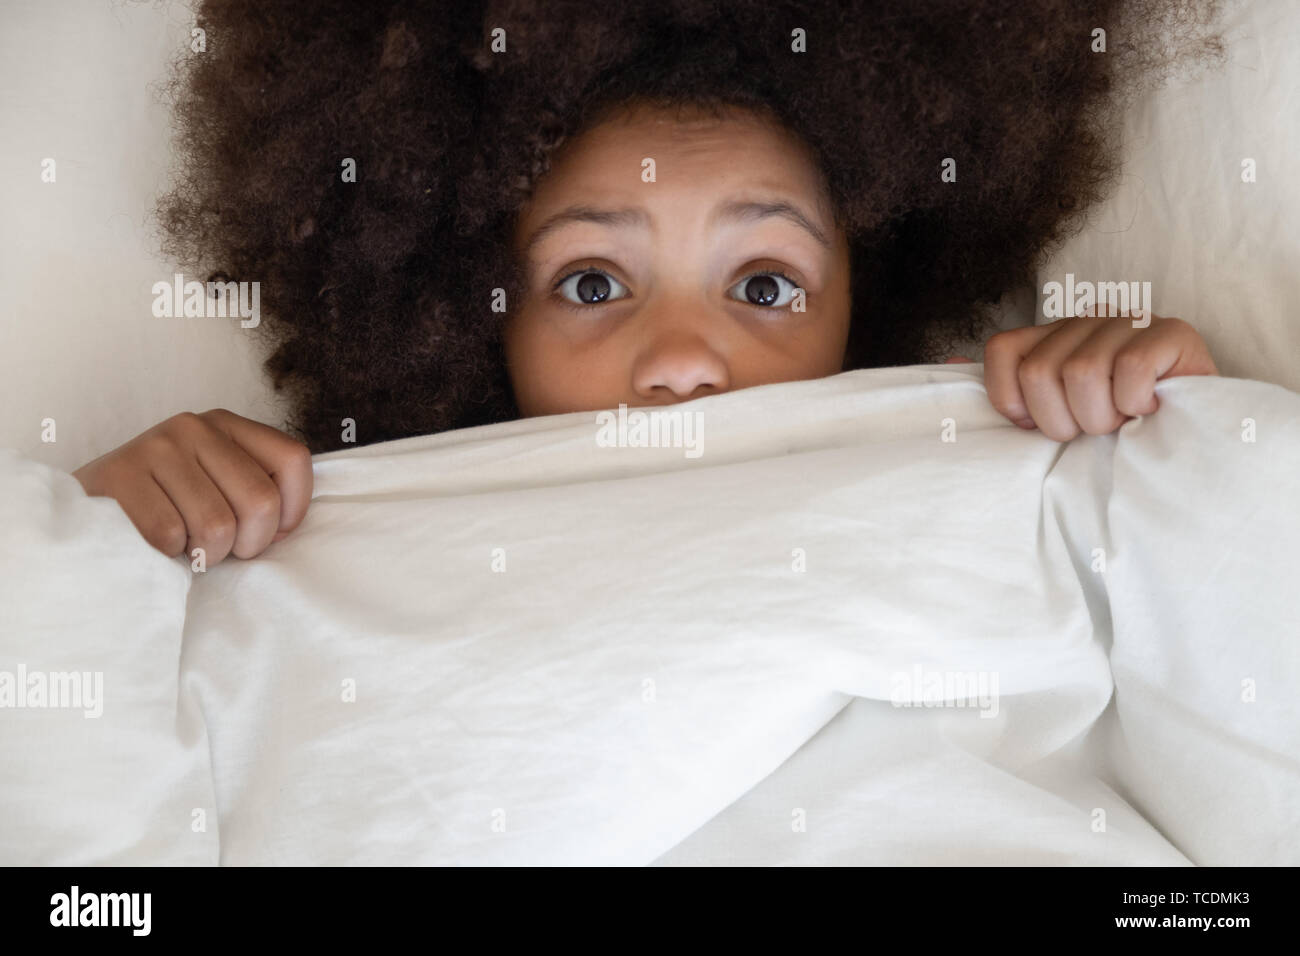 Scared african kid looking at camera covering blanket in bed Stock Photo